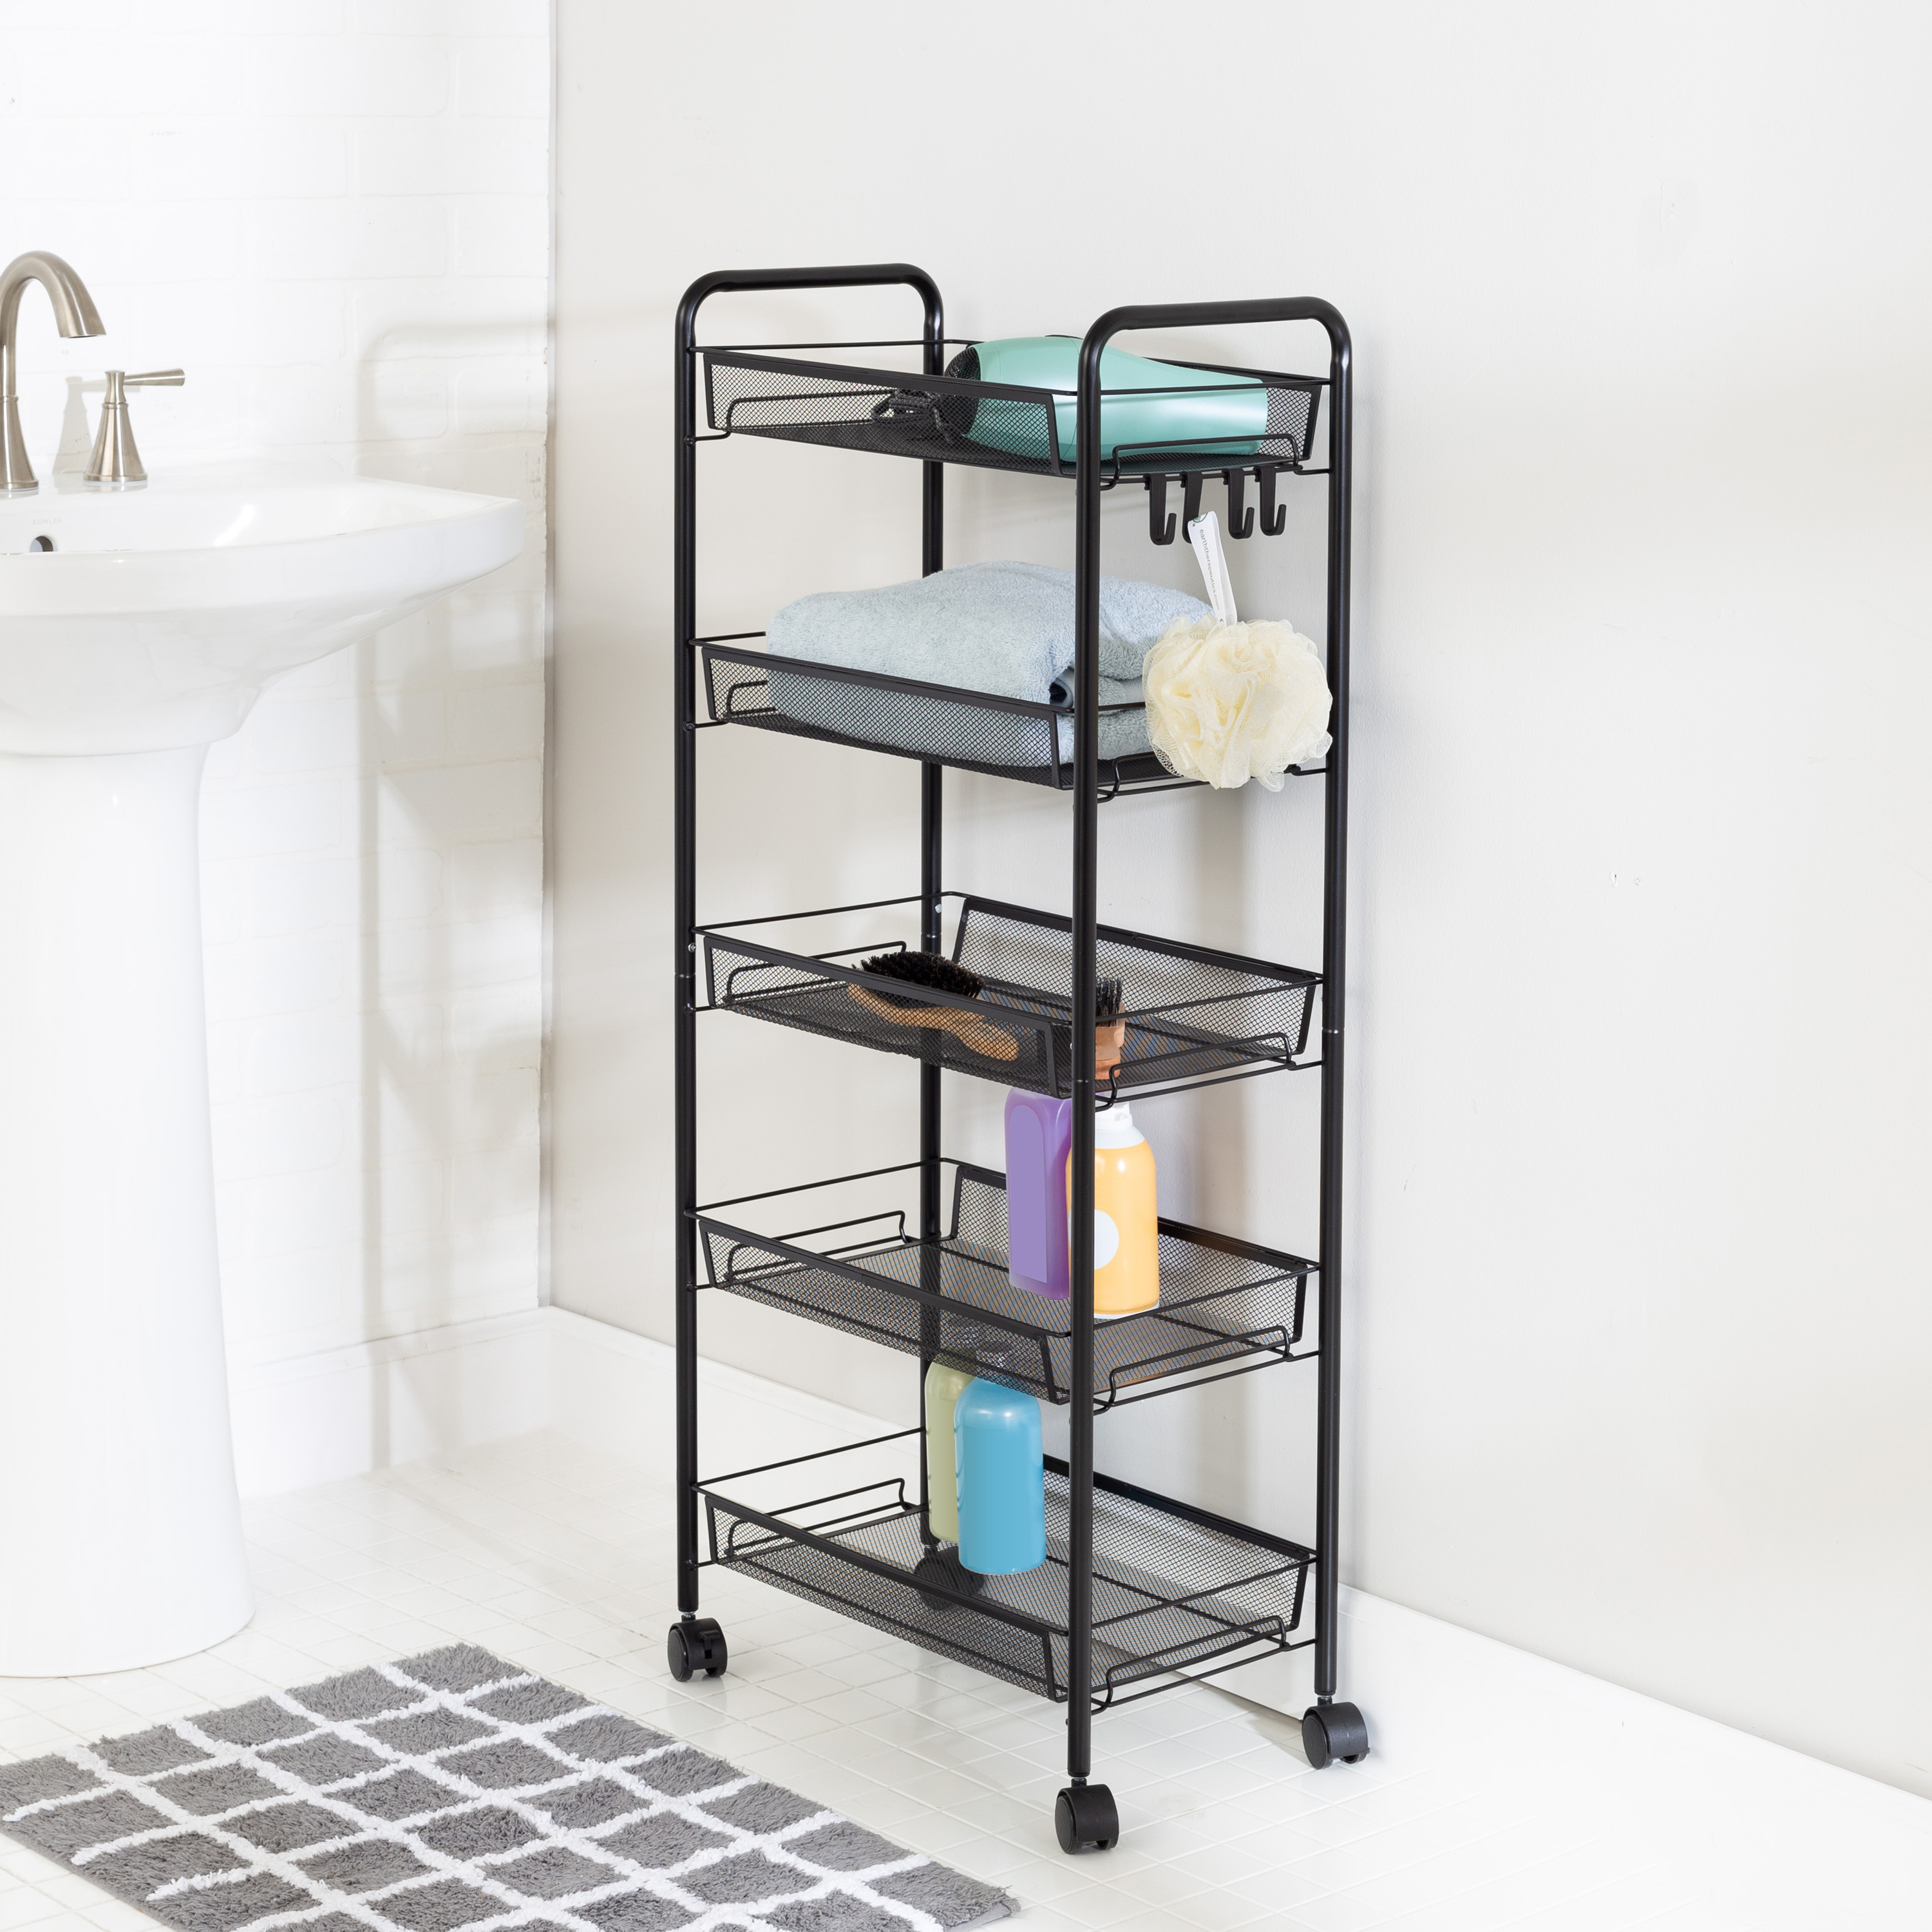 Honey-Can-Do Steel 5-Tier Rolling Storage Cart with 4 Hooks, Black - image 1 of 10